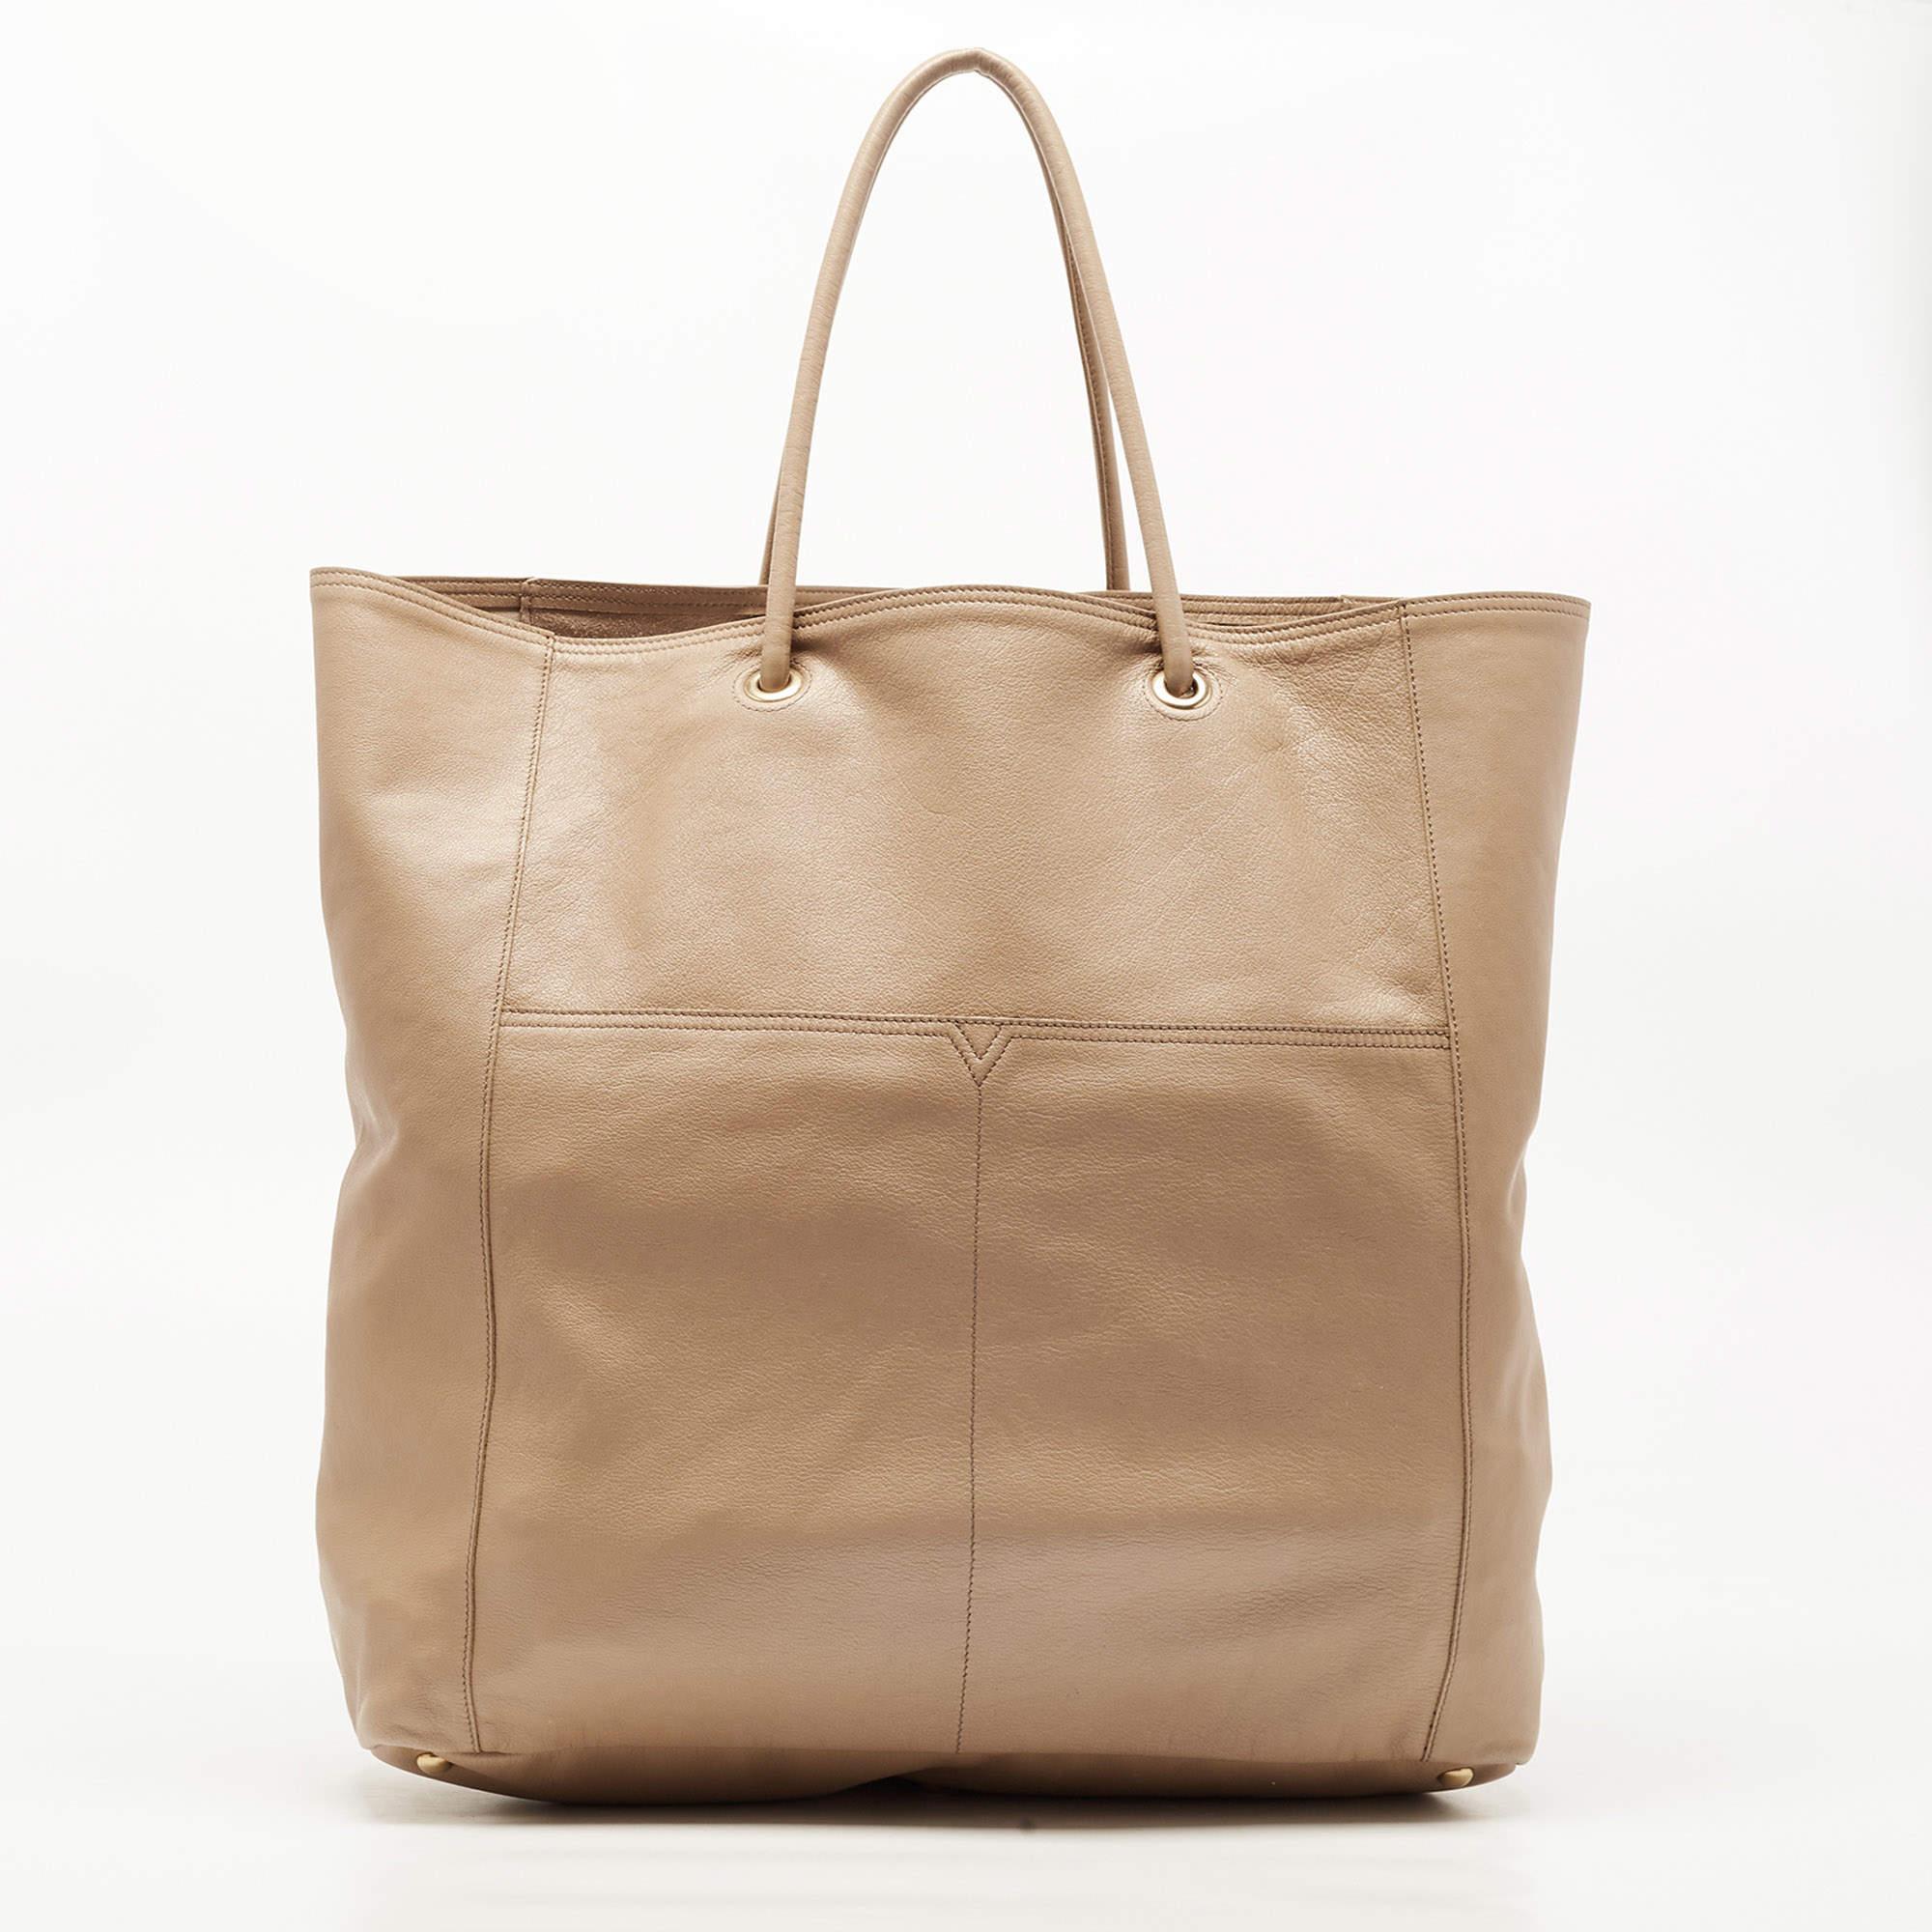 Yves Saint Laurent Beige Leather Lucky Chyc Tote 8